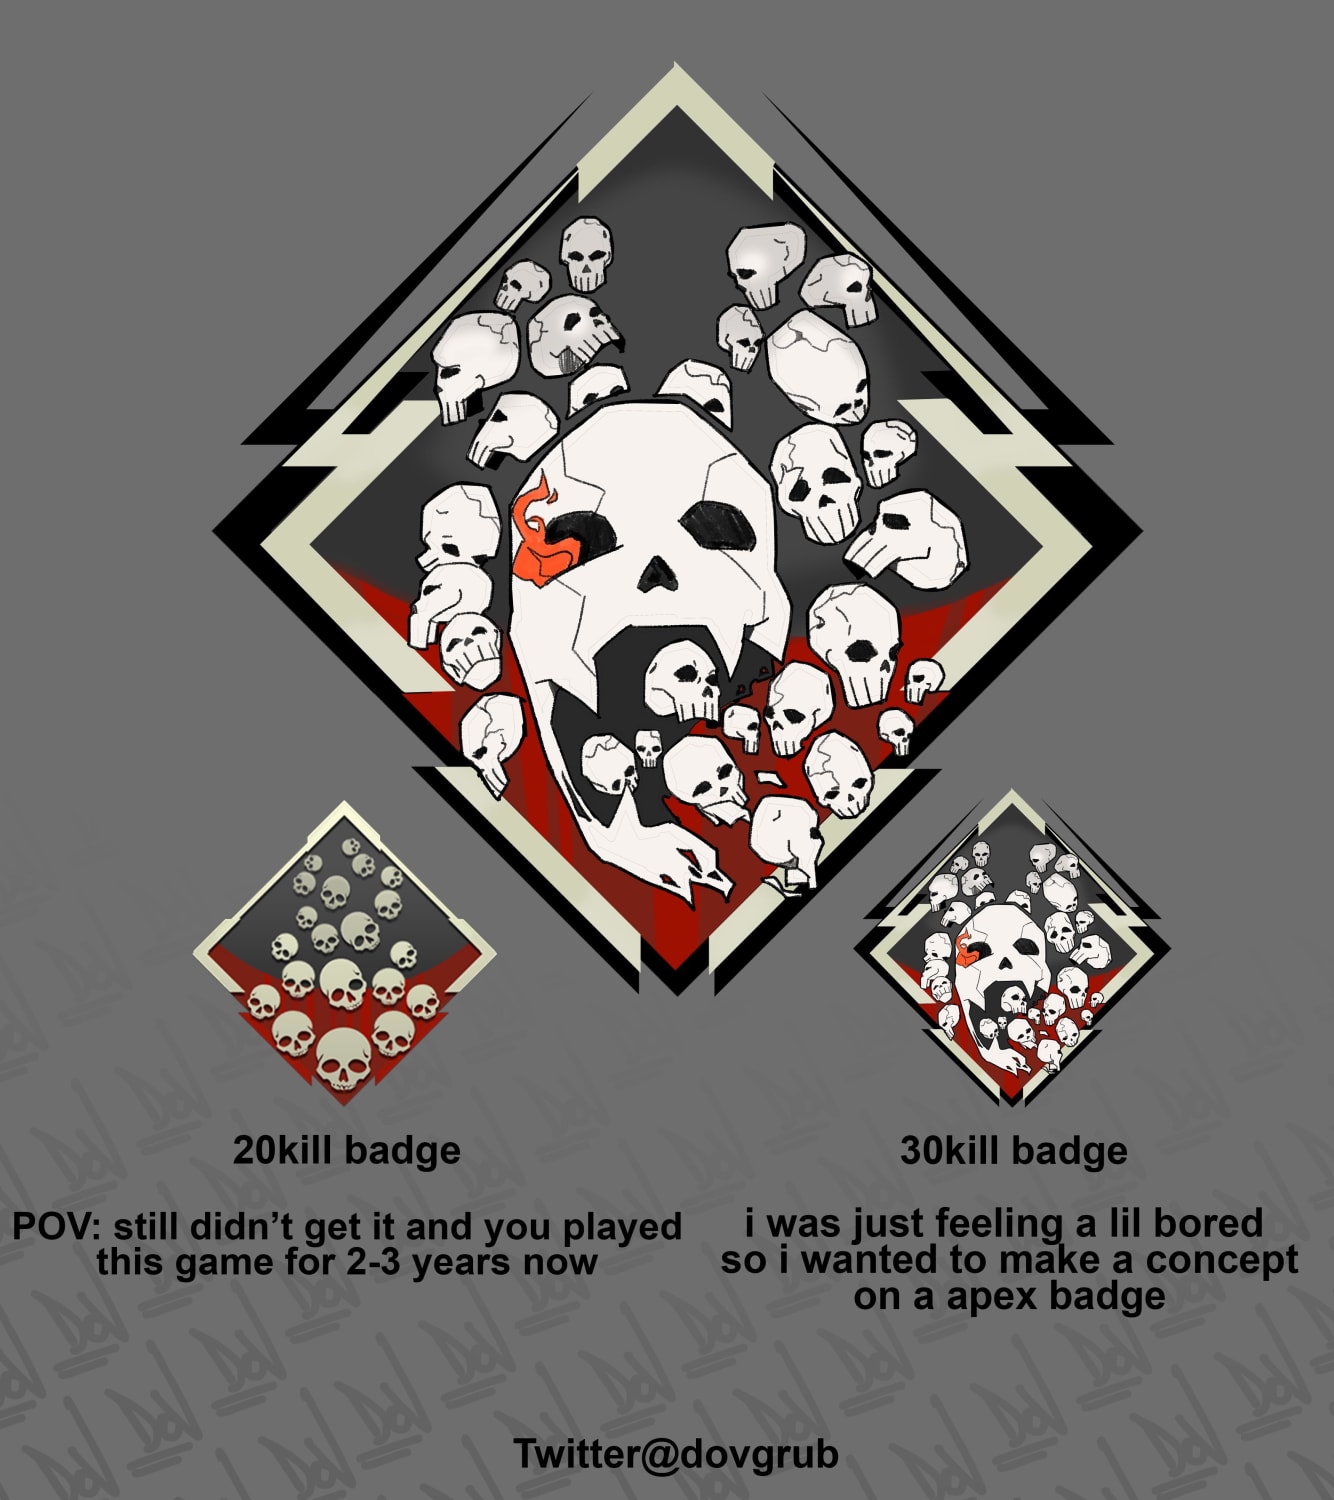 A concept art of a 30 kill badge hope y’all like it :)